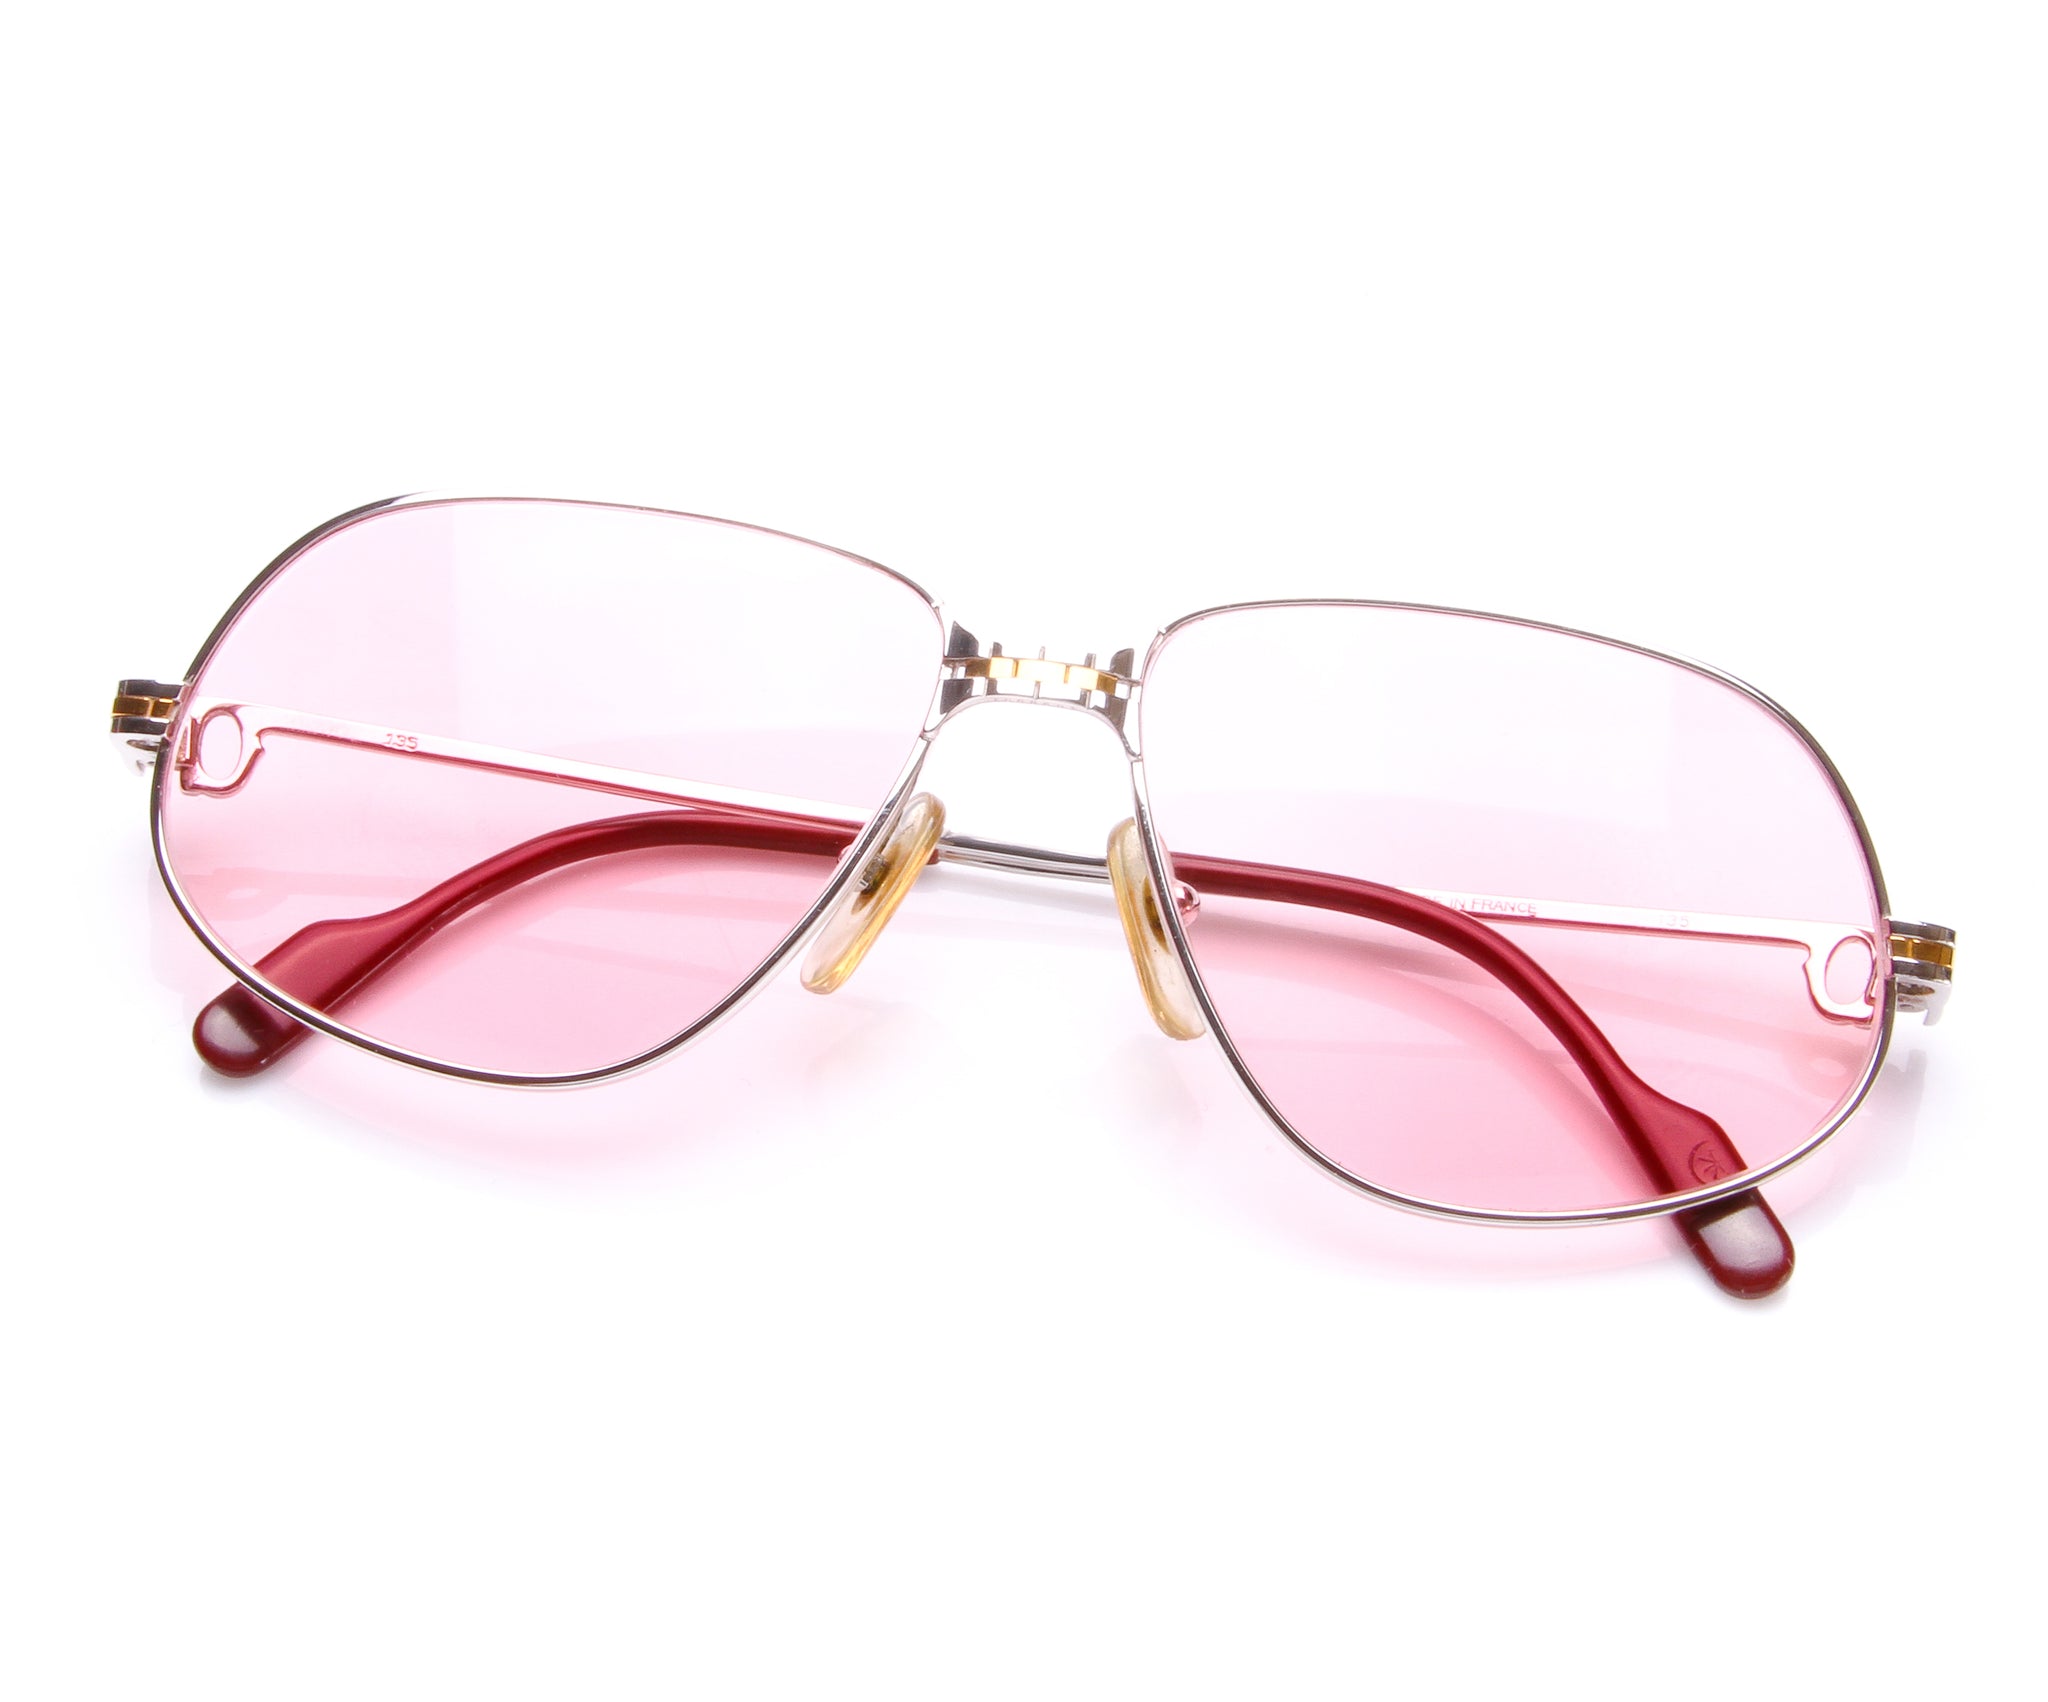 cartier pink glasses